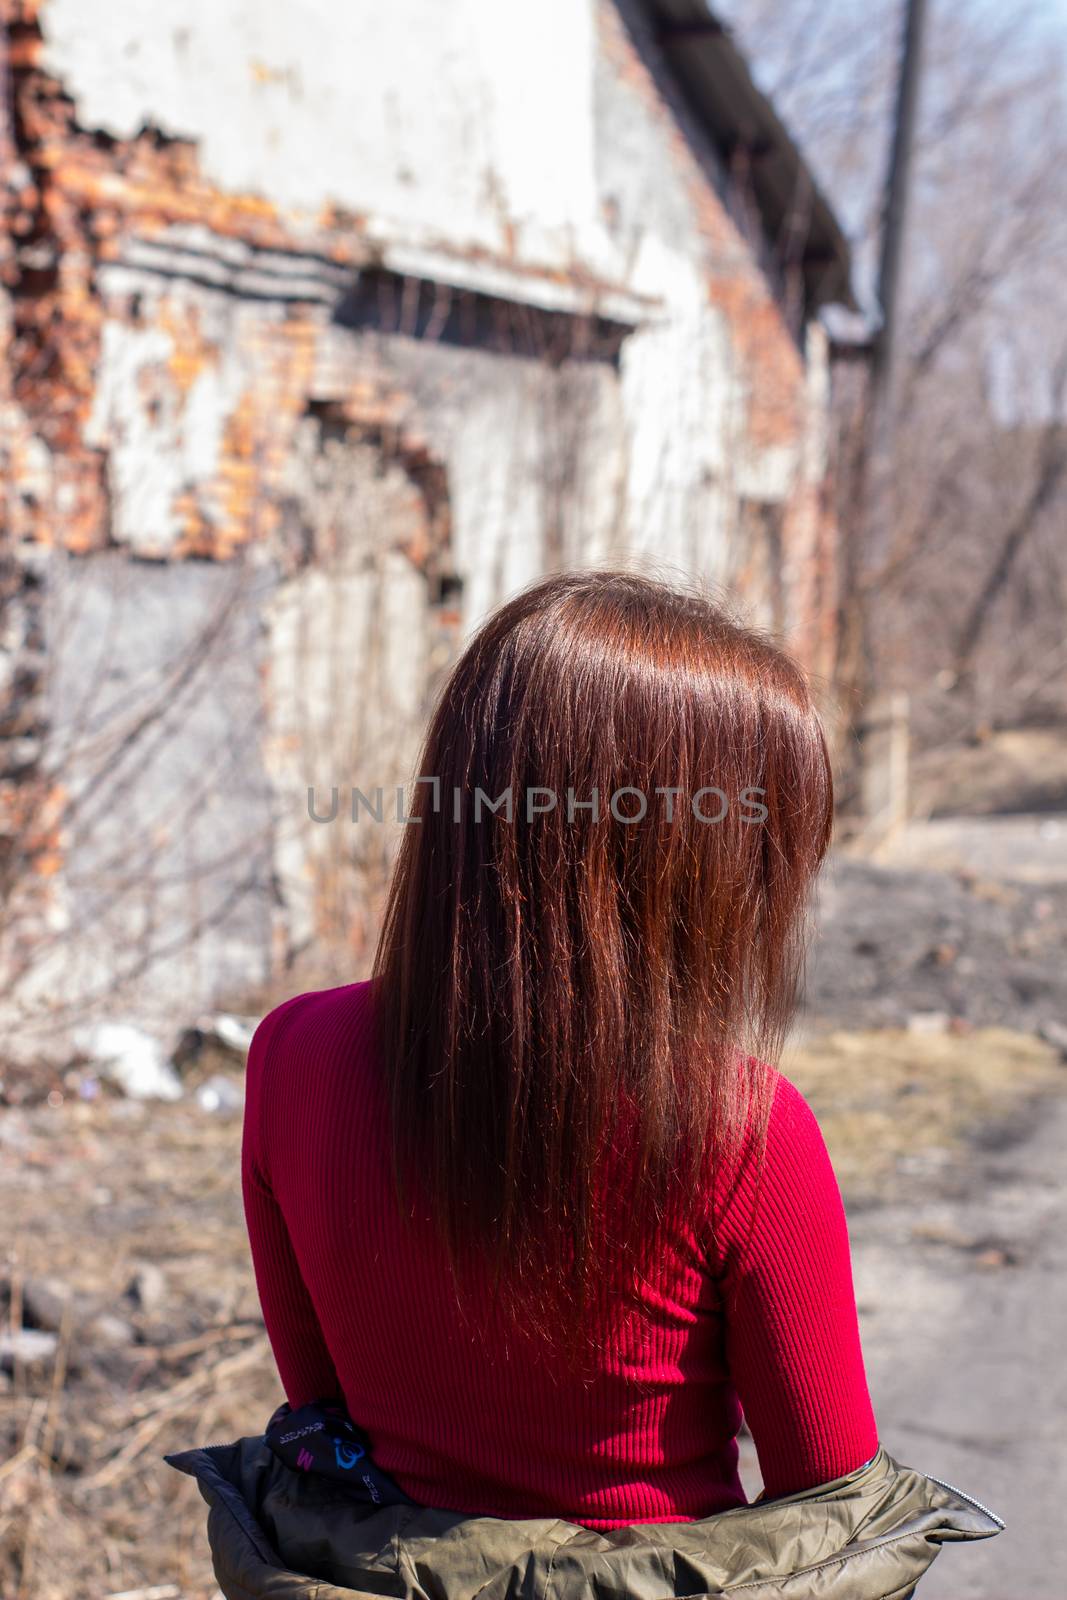 Women's hair brown color on the street, on a Sunny day. Beautiful women's hair with brown ash color.